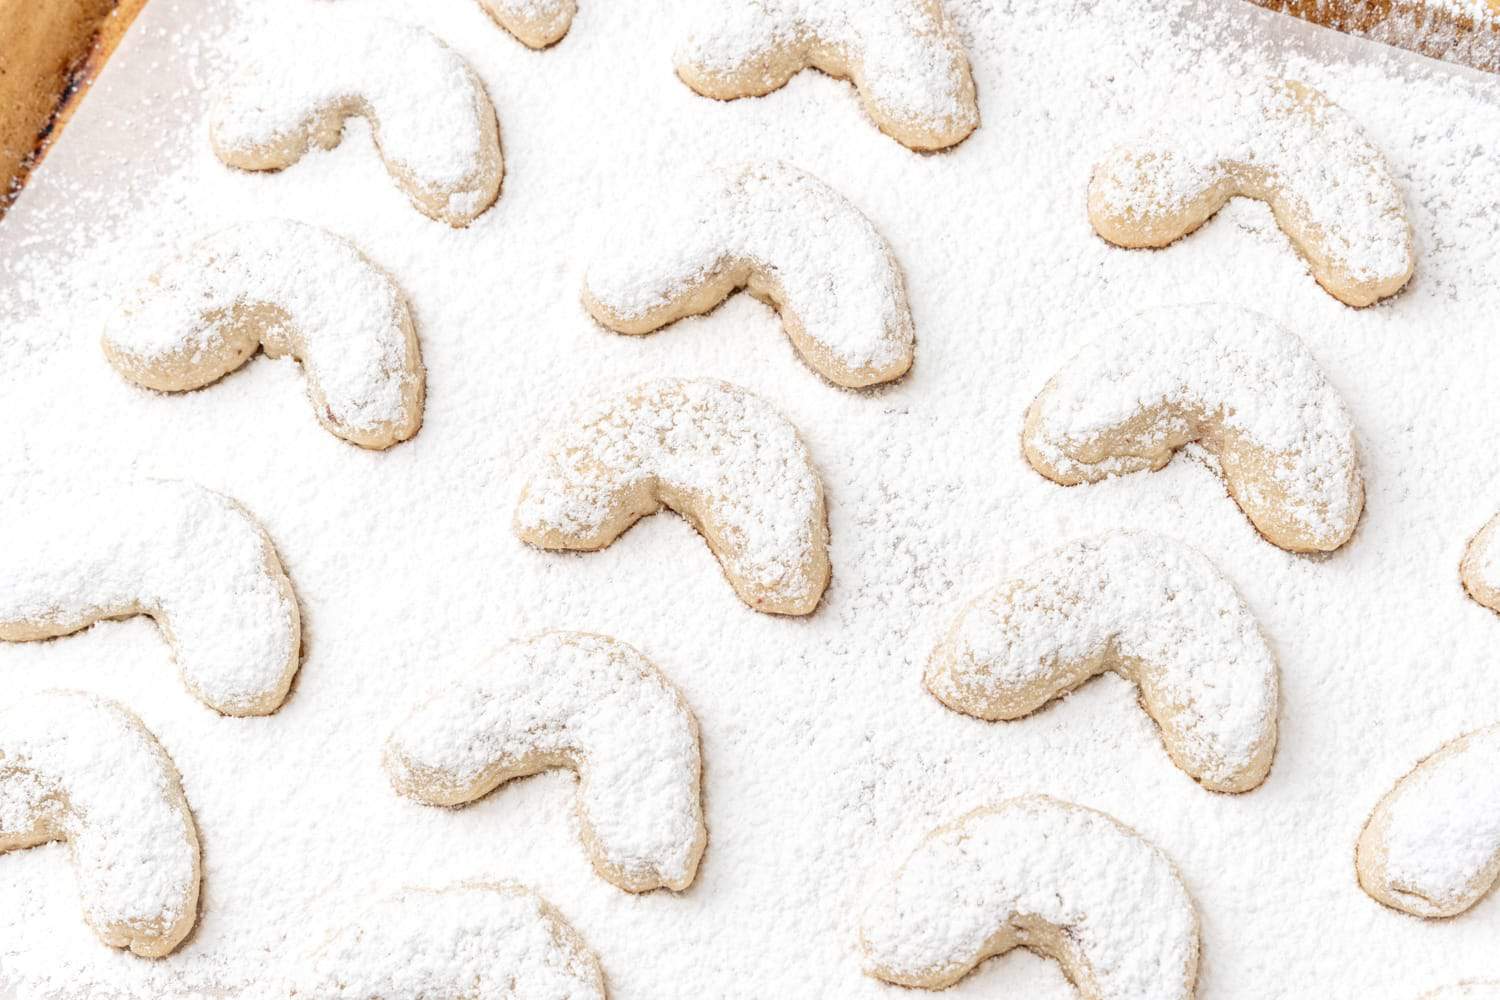 Powdered sugar has been dusted over almond crescent cookies on a sheet pan.